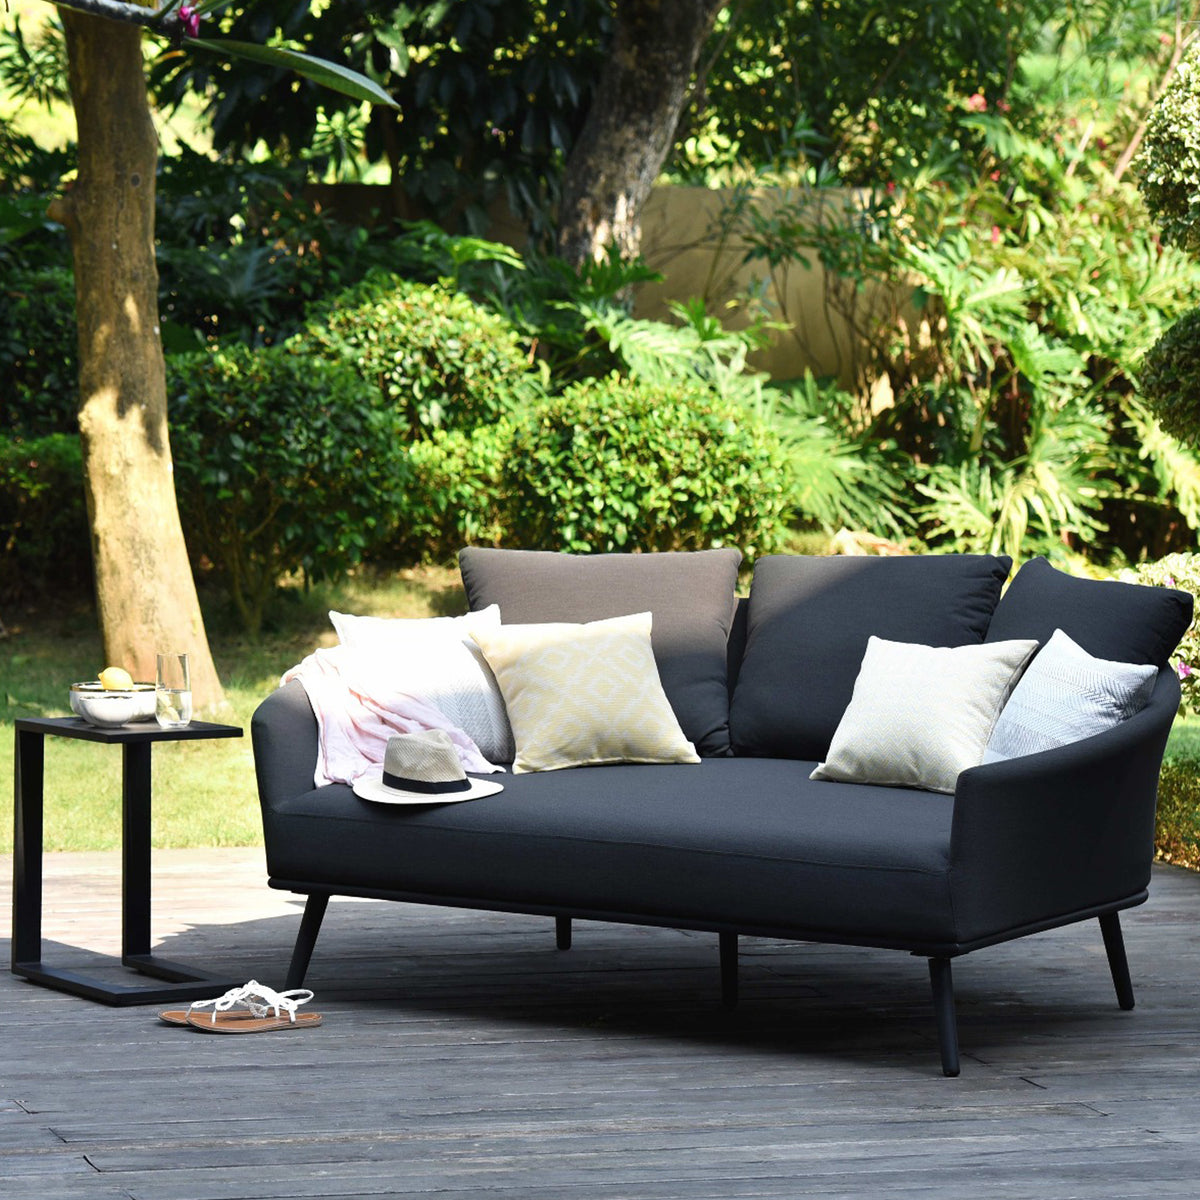 Maze Charcoal Ark Outdoor Daybed Sofa from Roseland Furniture